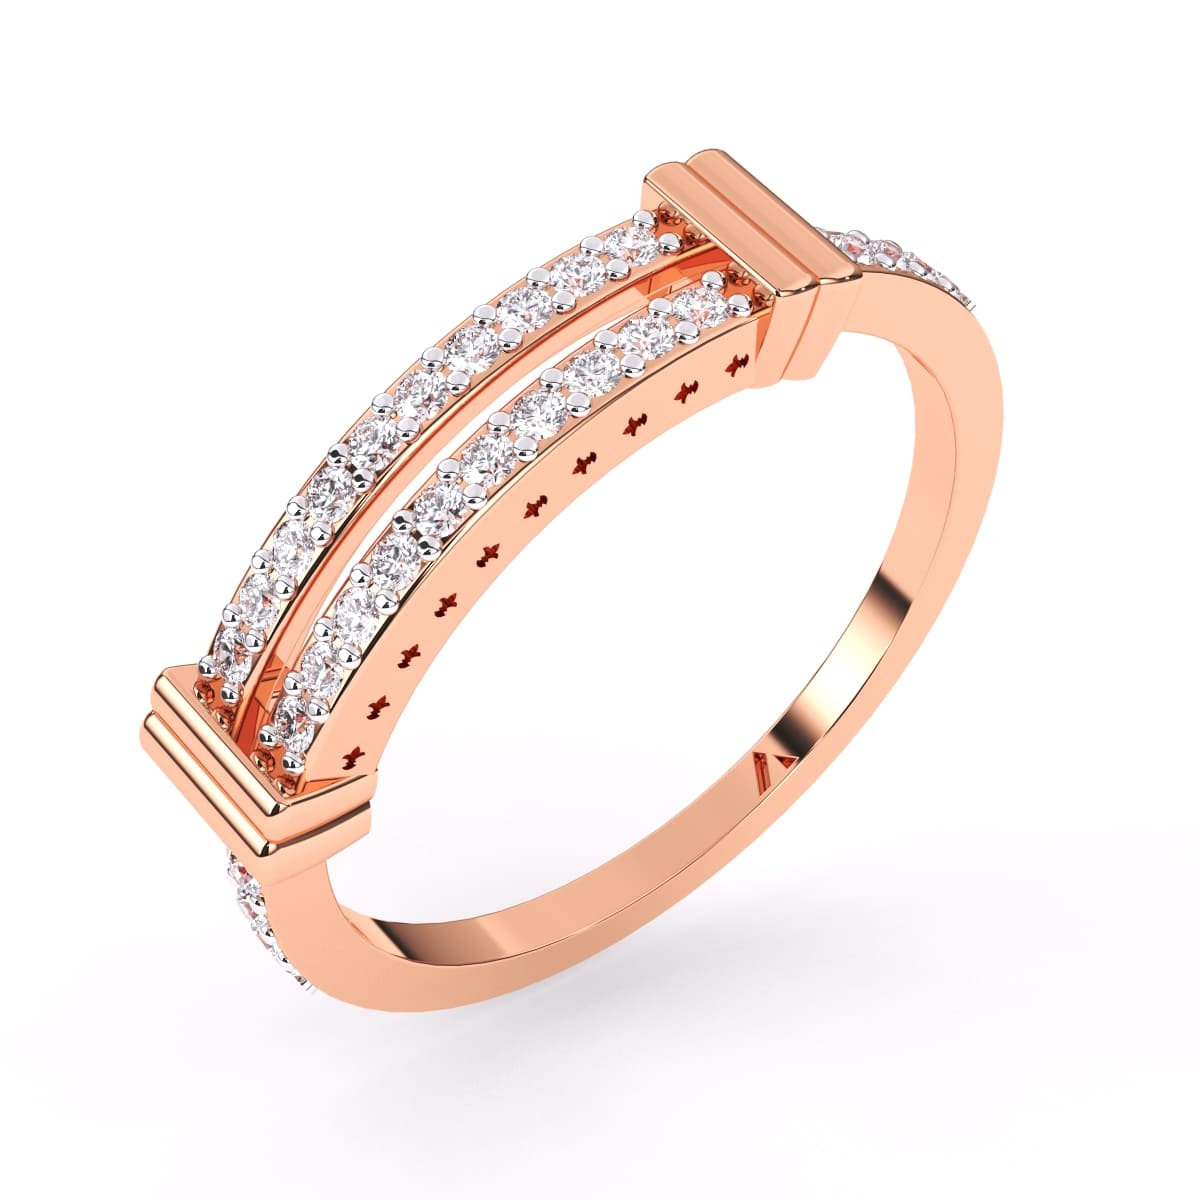 Buy 3 Layer Diamond Ring in India | Chungath Jewellery Online- Rs. 54,600.00